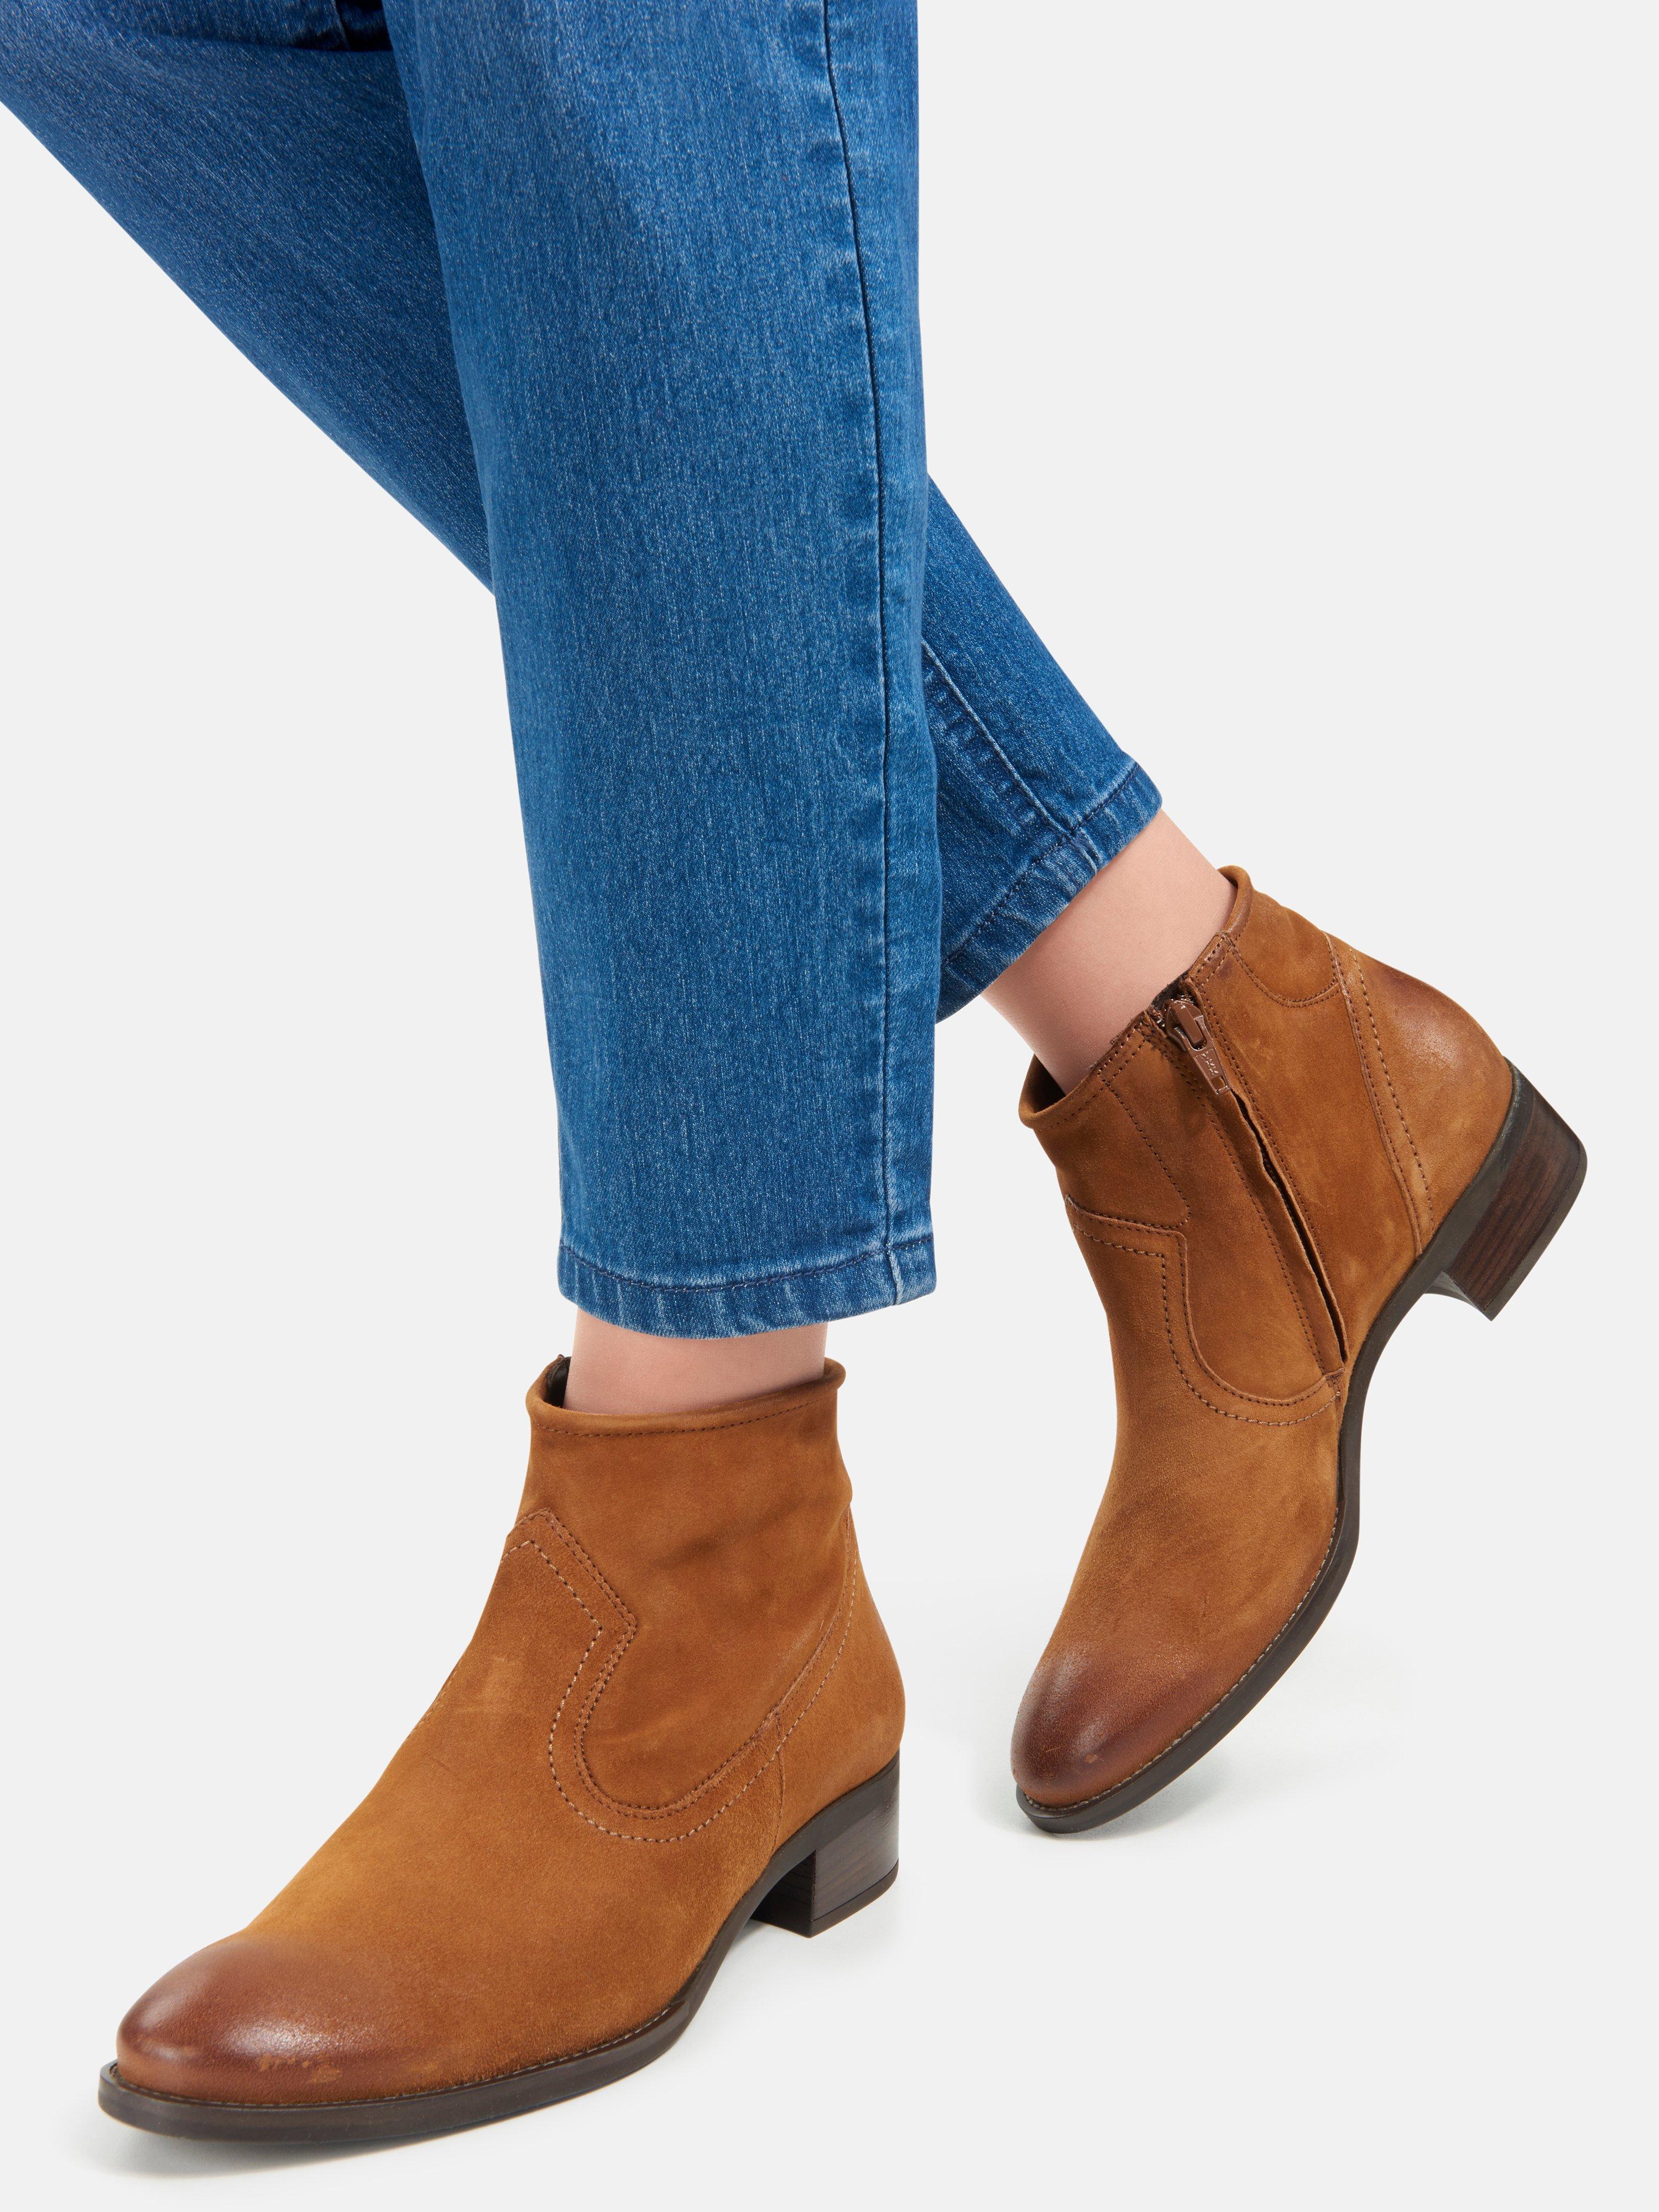 Paul Green - Ankle boots made of calf suede leather - brandy